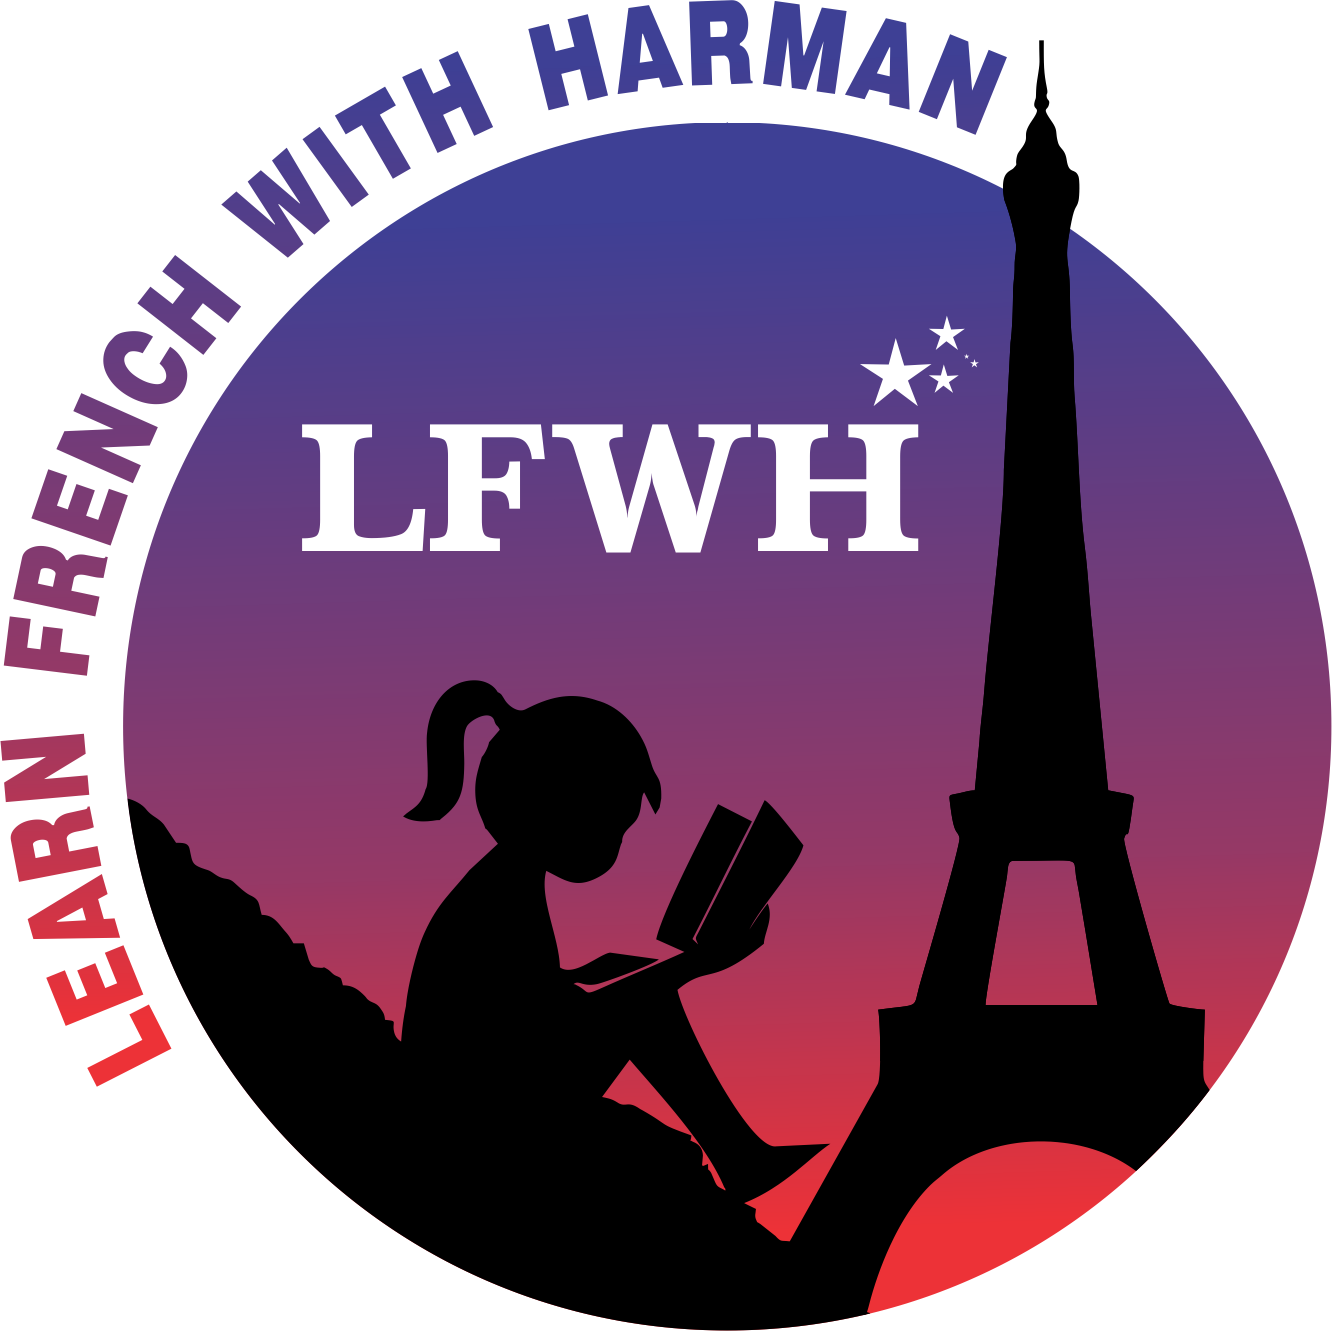 Learn French with Harman Logo